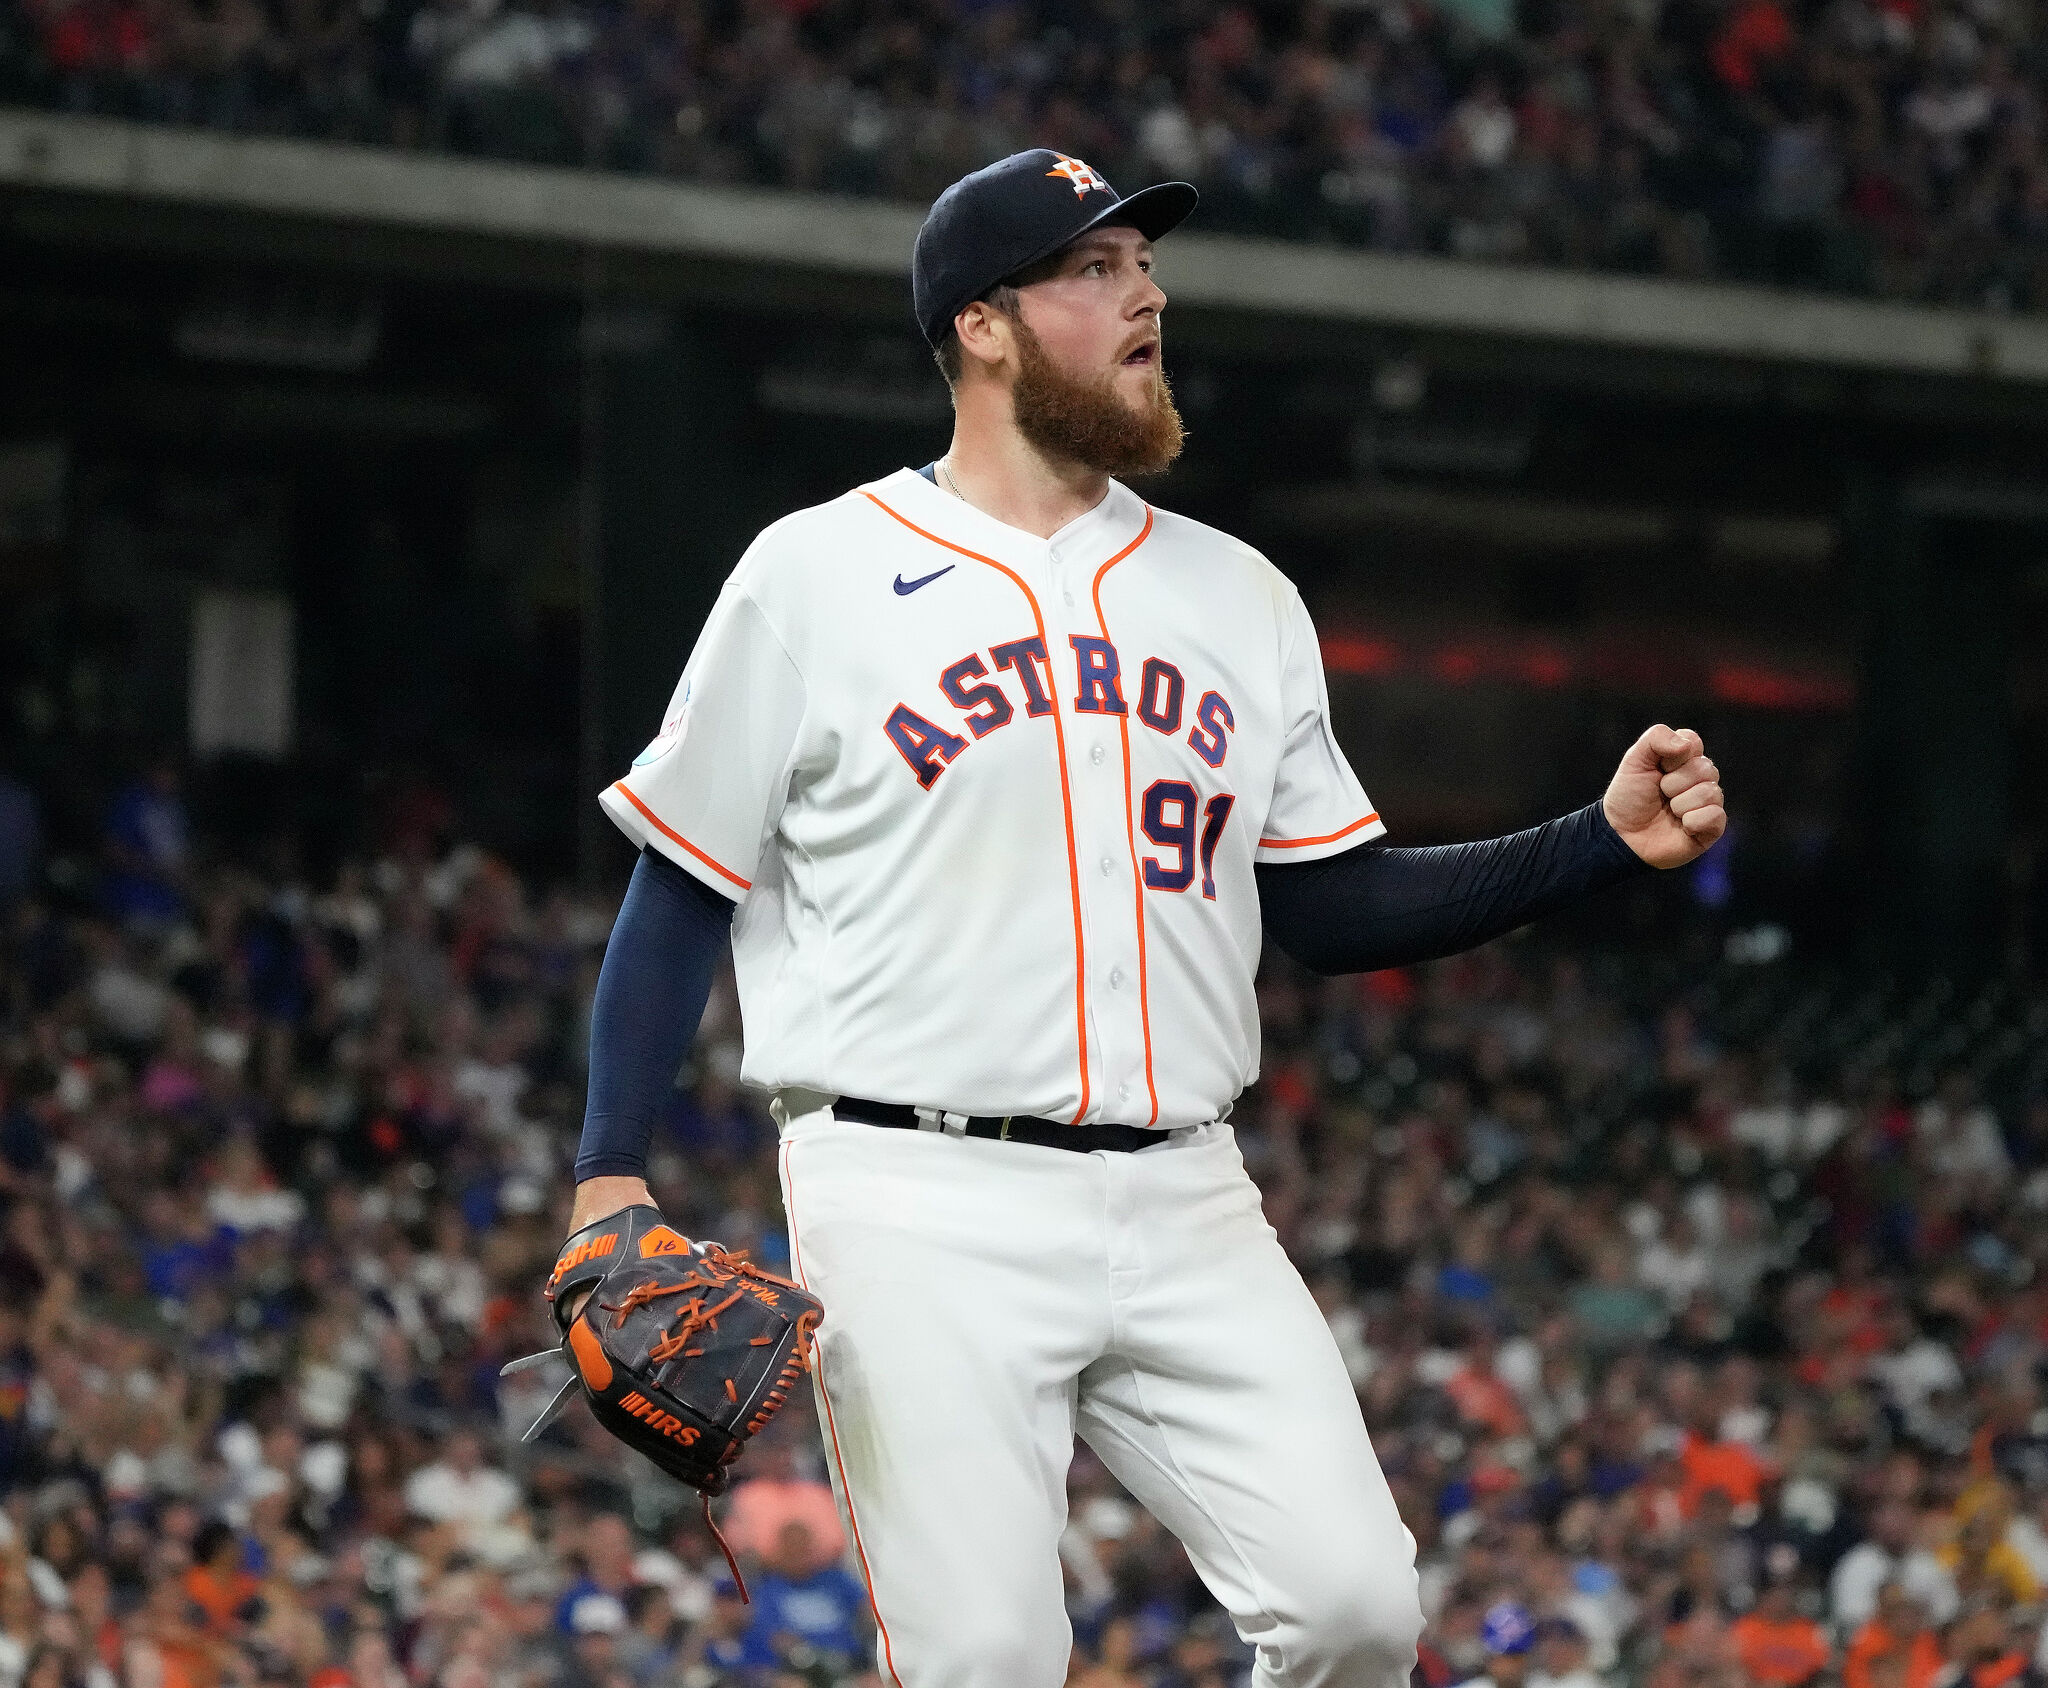 Astros' all-time best relief pitchers